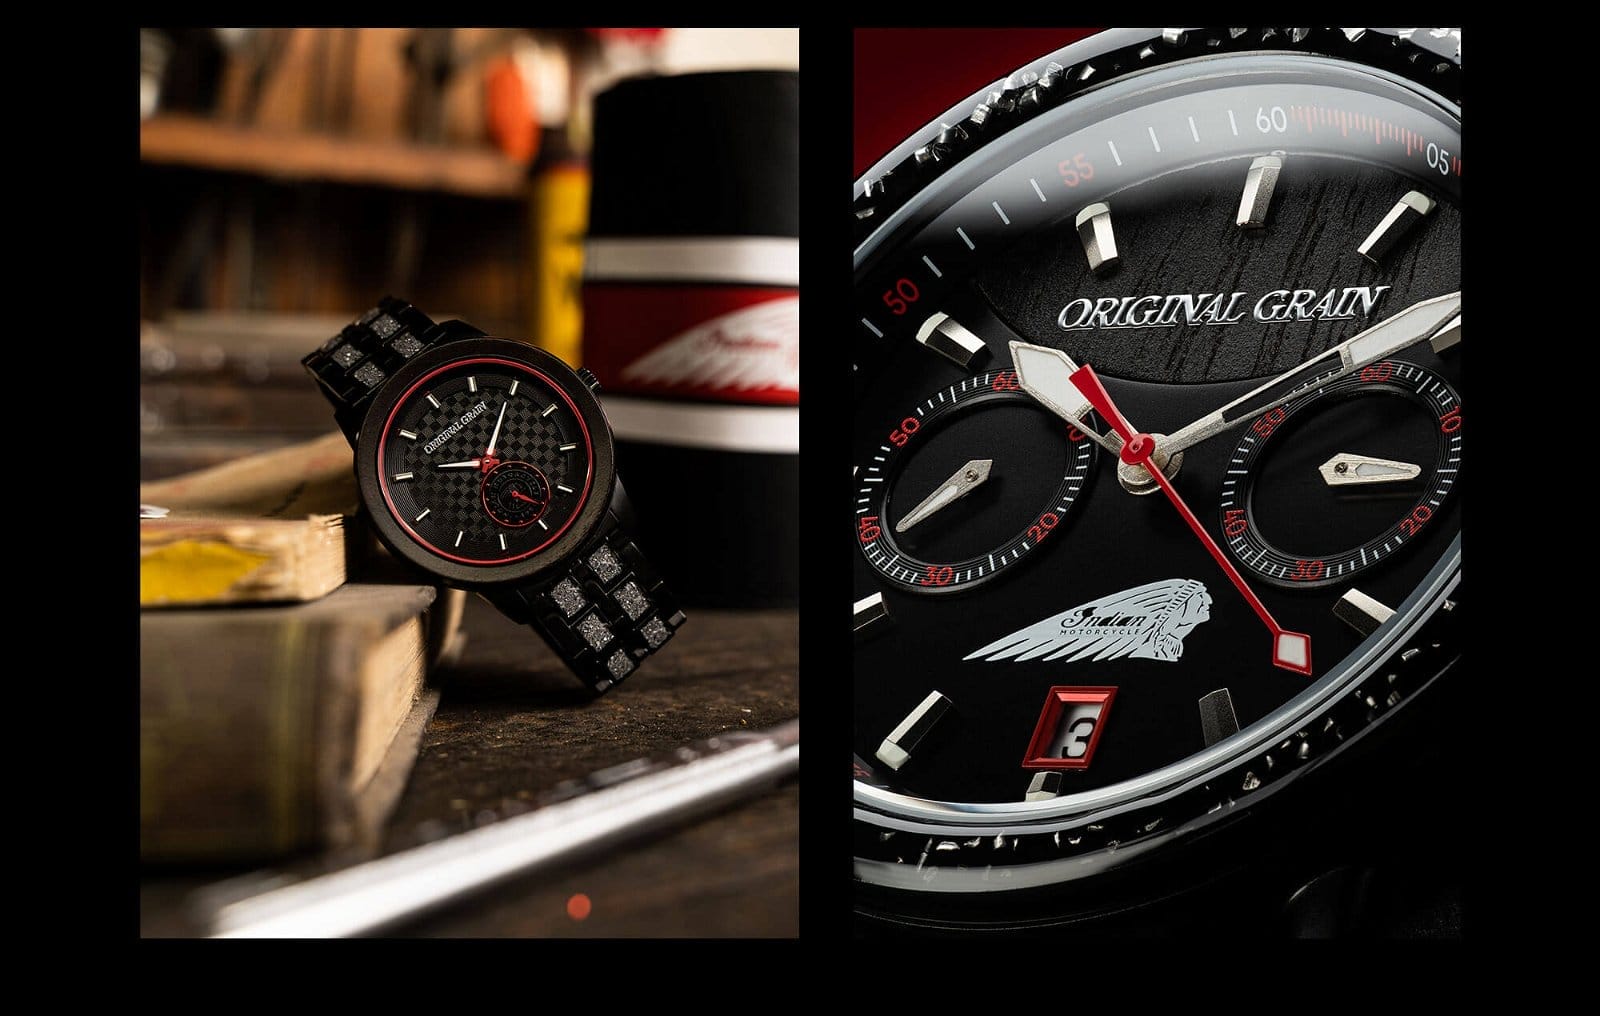 Original Grain's Limited Edition Timepieces in collaboration with Indian Motorcycle